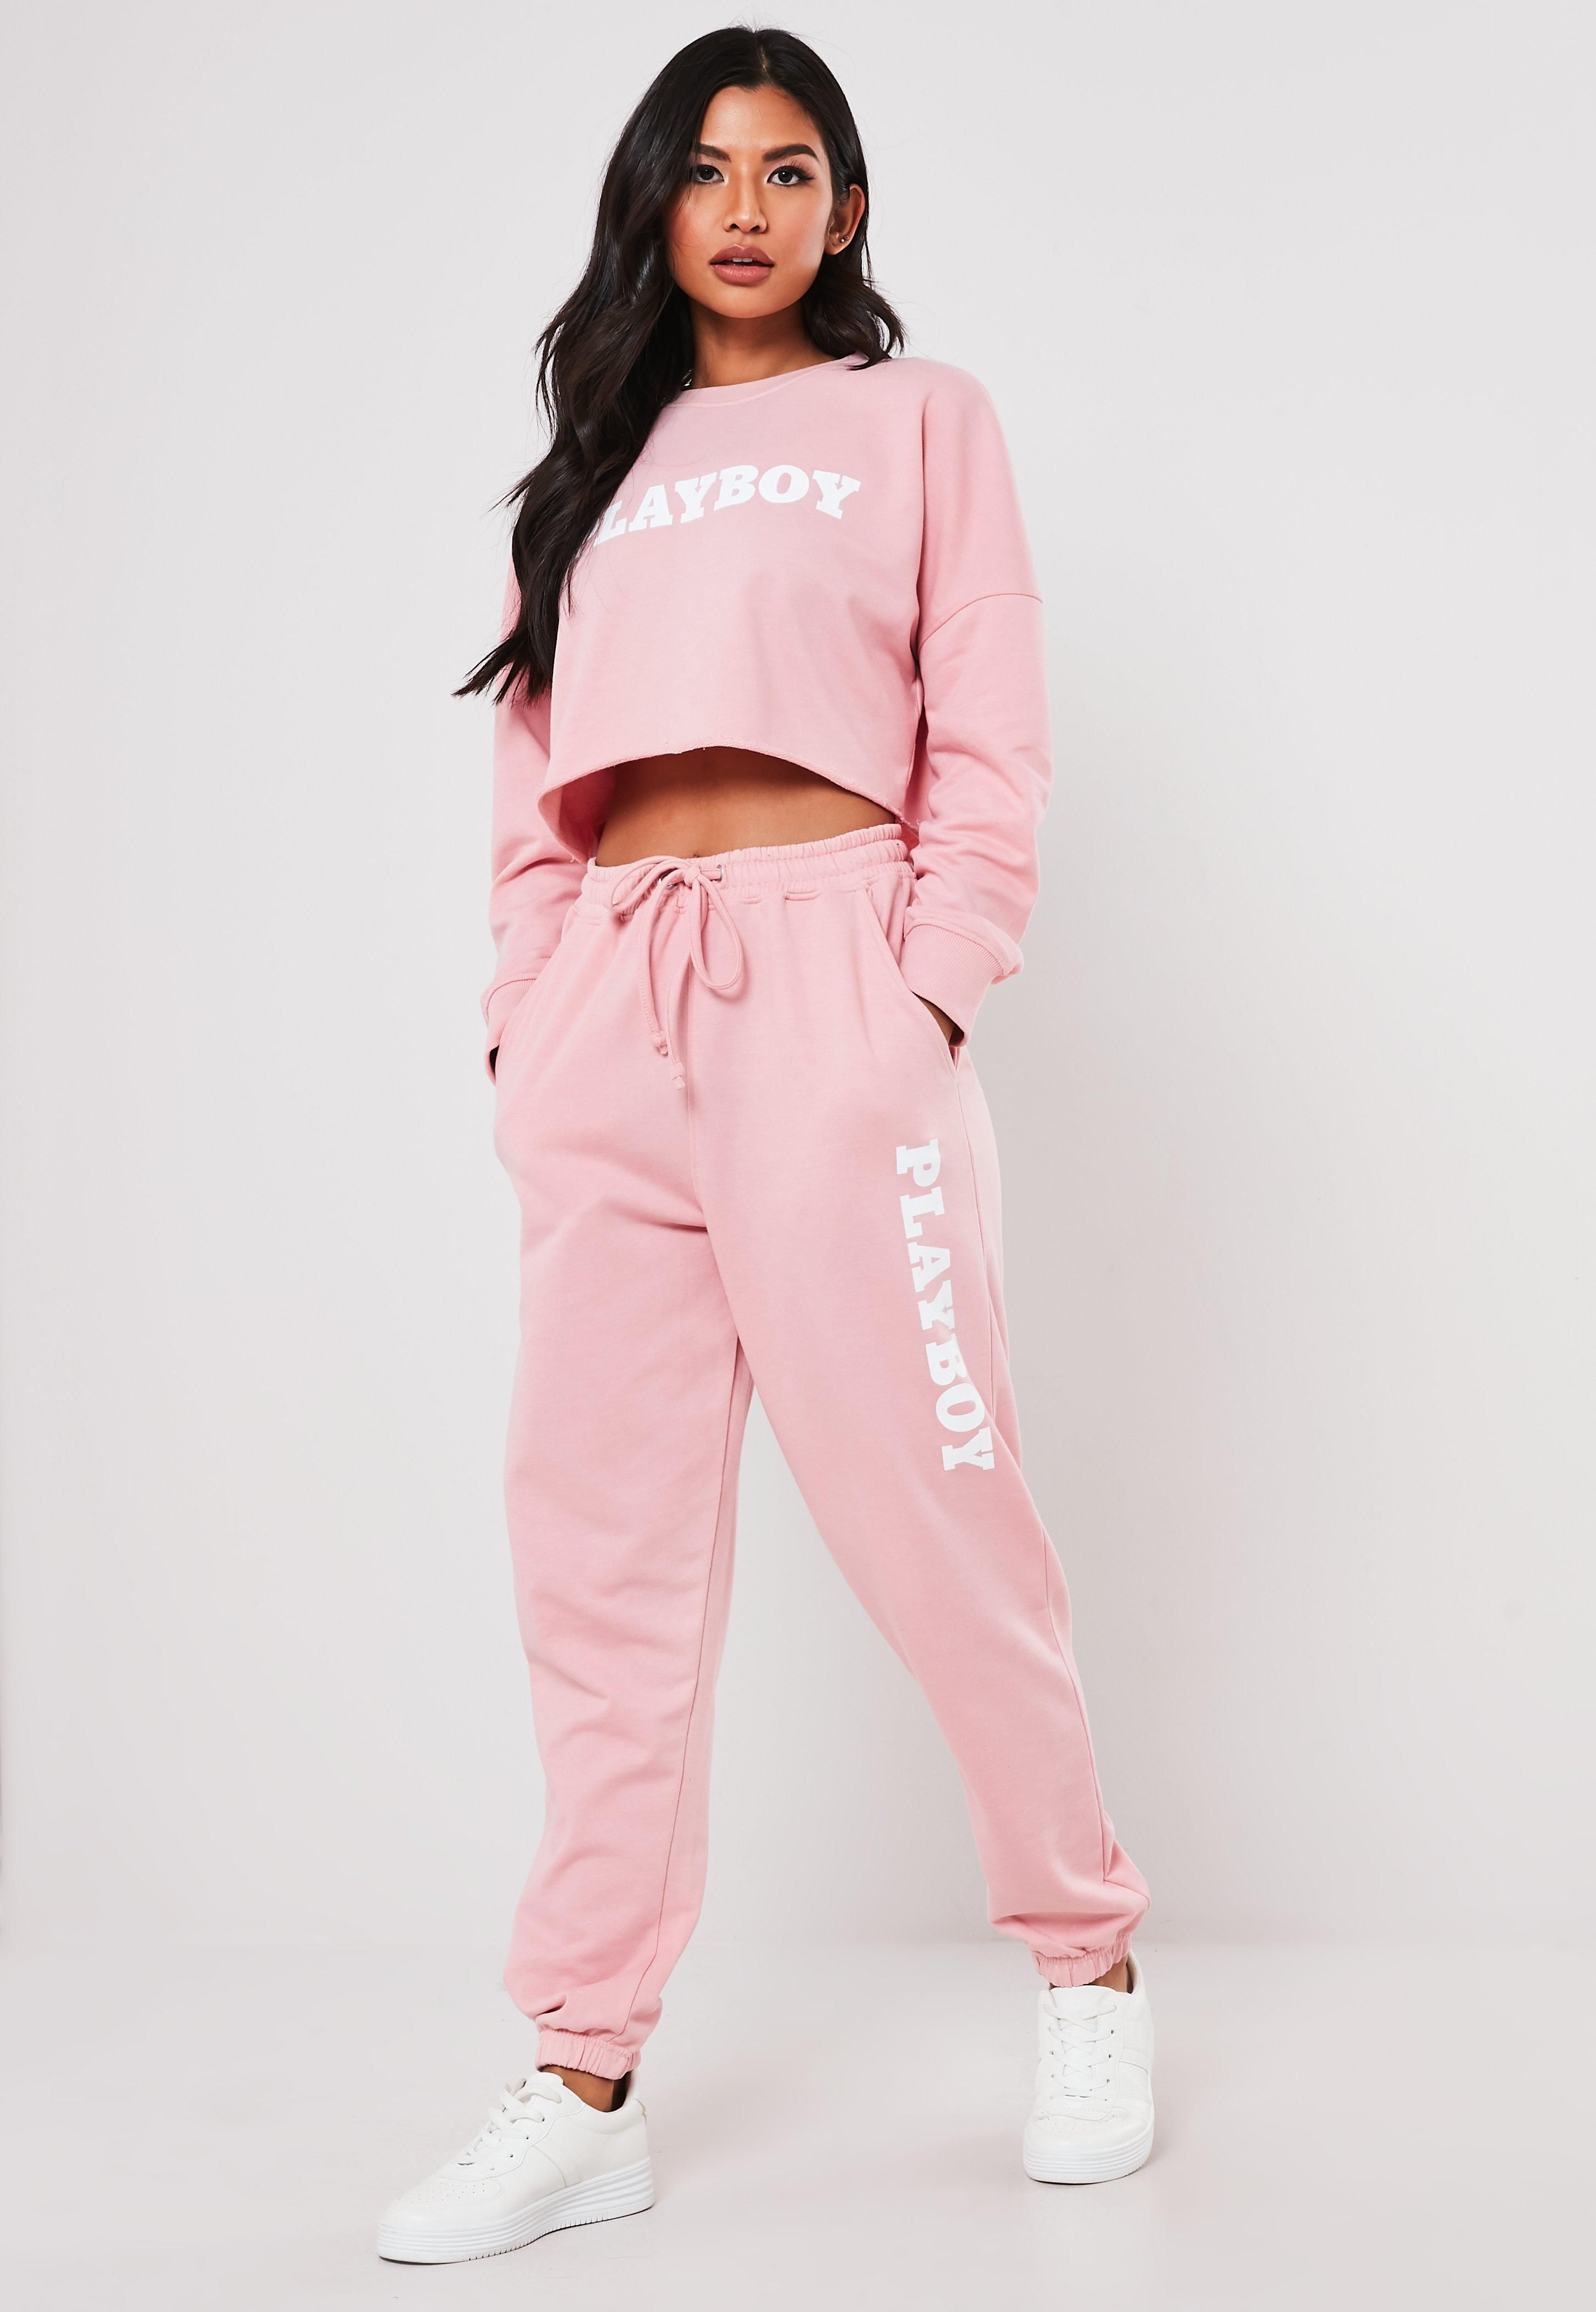 Missguided new 'joggers and a nice top' edit